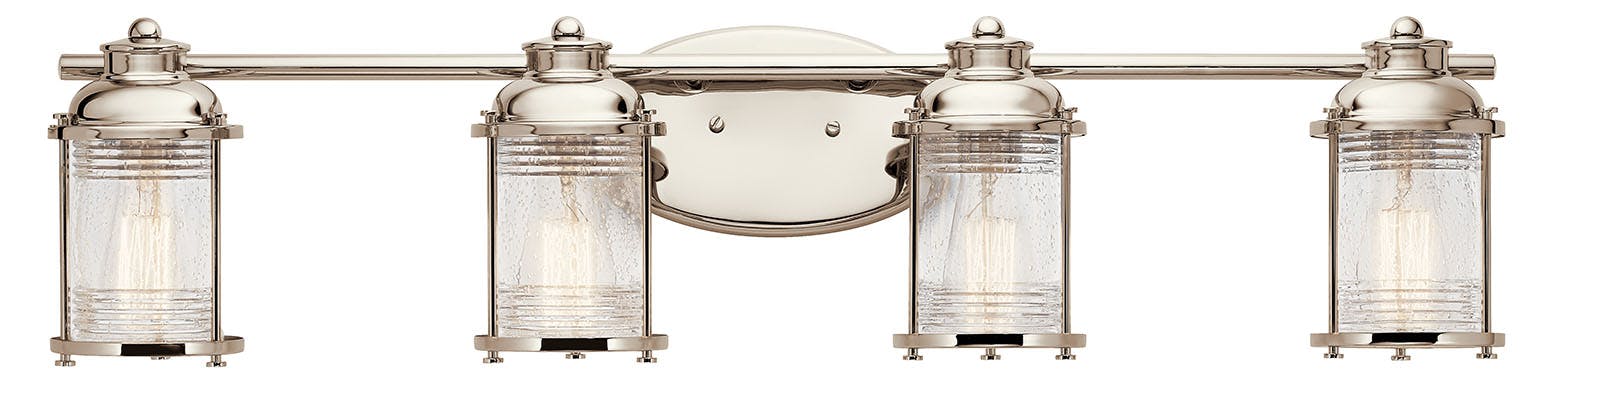 Front view of the Ashland Bay 4 Light Vanity Light Nickel on a white background